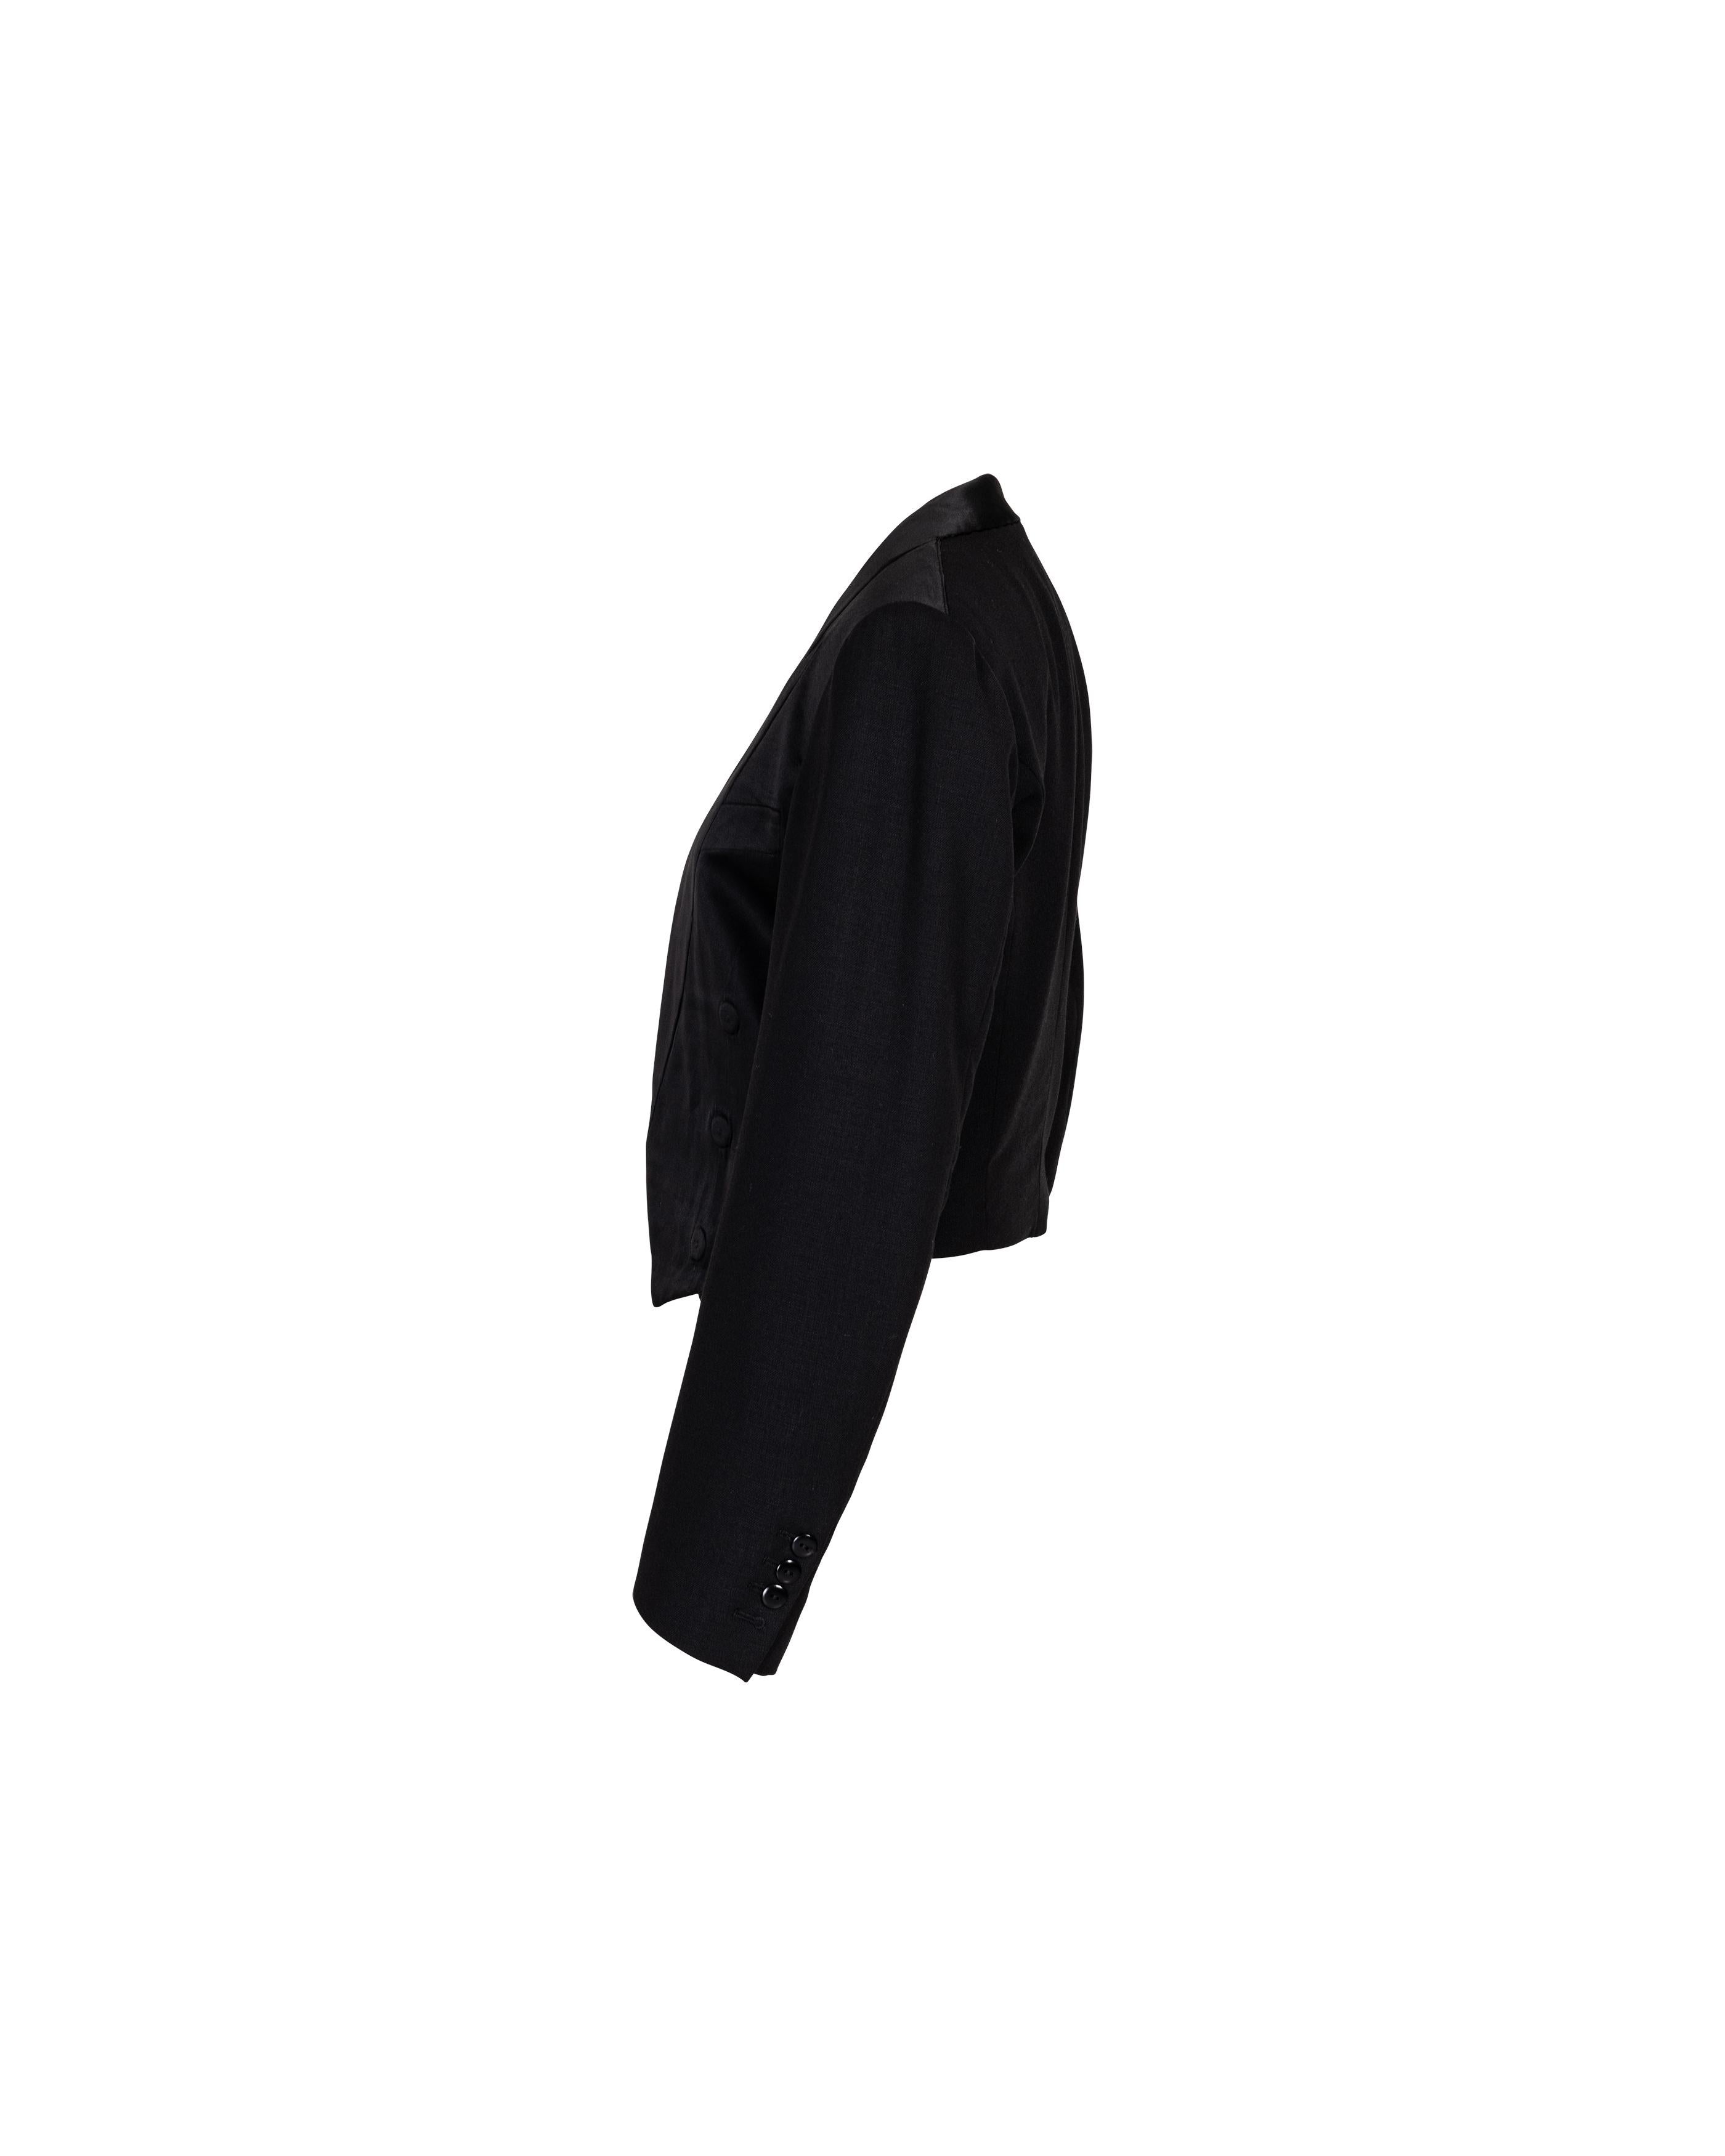 S/S 2002 Maison Martin Margiela black cropped wool long sleeve tuxedo blazer jacket. Cropped jacket with fully built-in connected flat illusion lapel and triple button detail on both sides of waist. Interior single button closure. Fabric Contents: